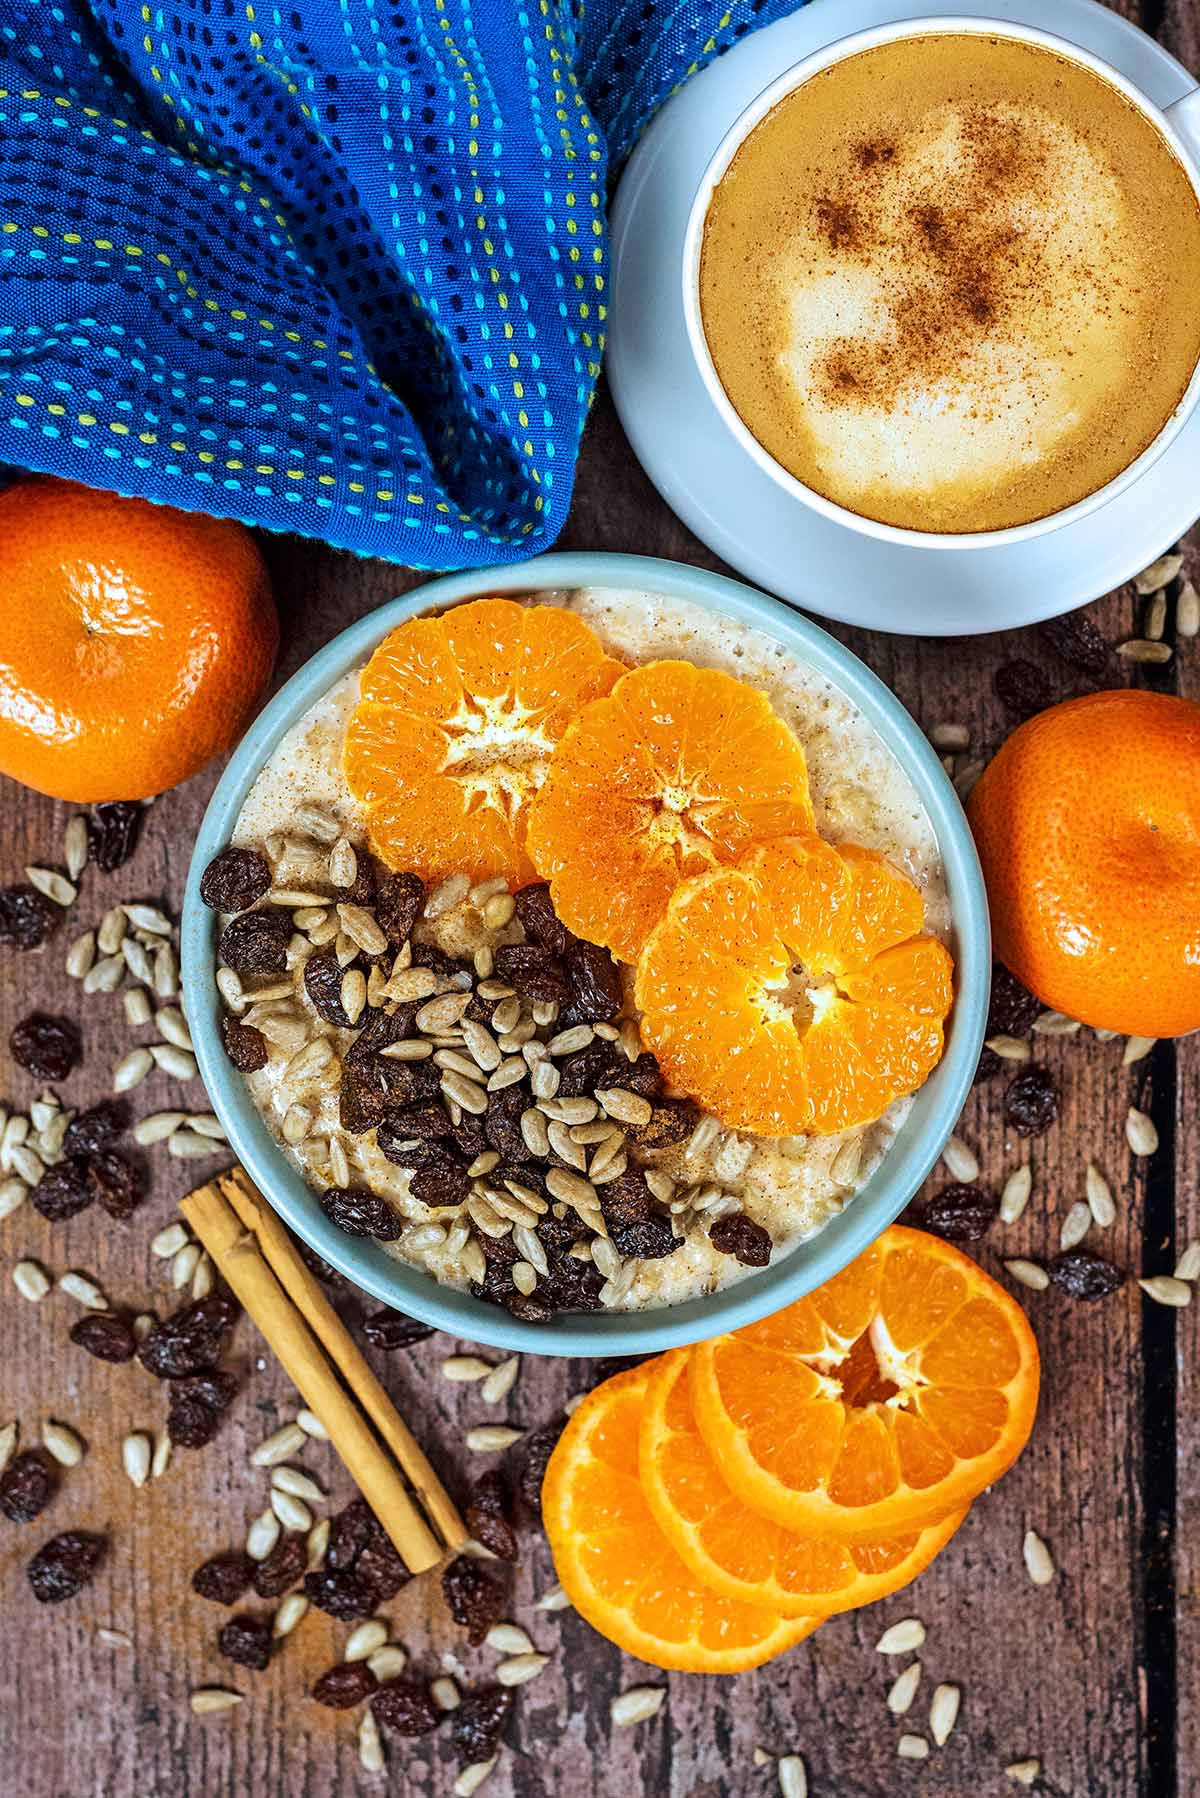 A bowl of porridge topped with sliced oranges next to a cup of coffee.